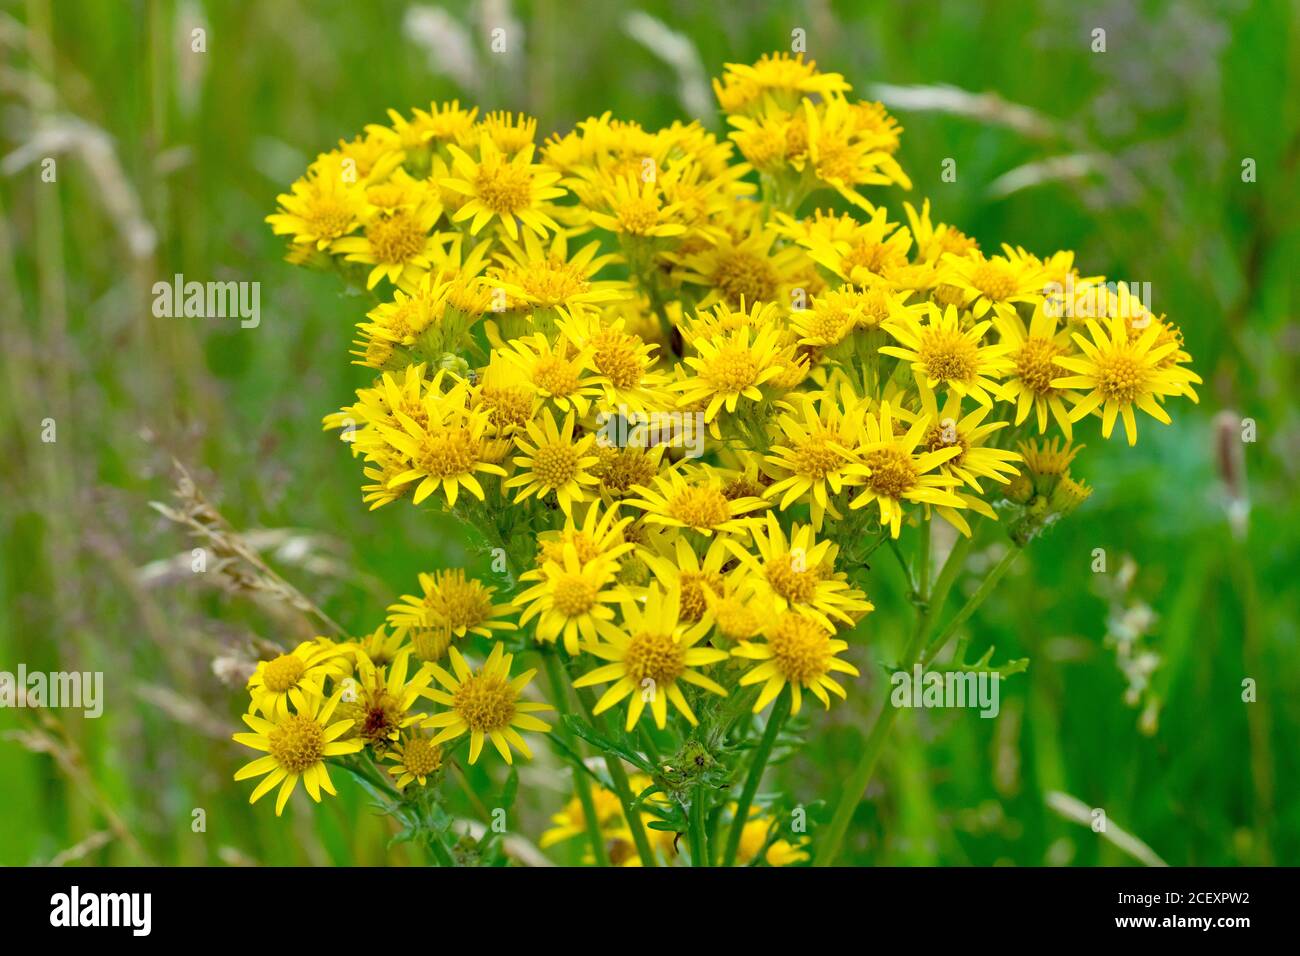 Common Ragwort (senecio jacobaea), close up of the top of the plant showing the many yellow flowers it produces. Stock Photo